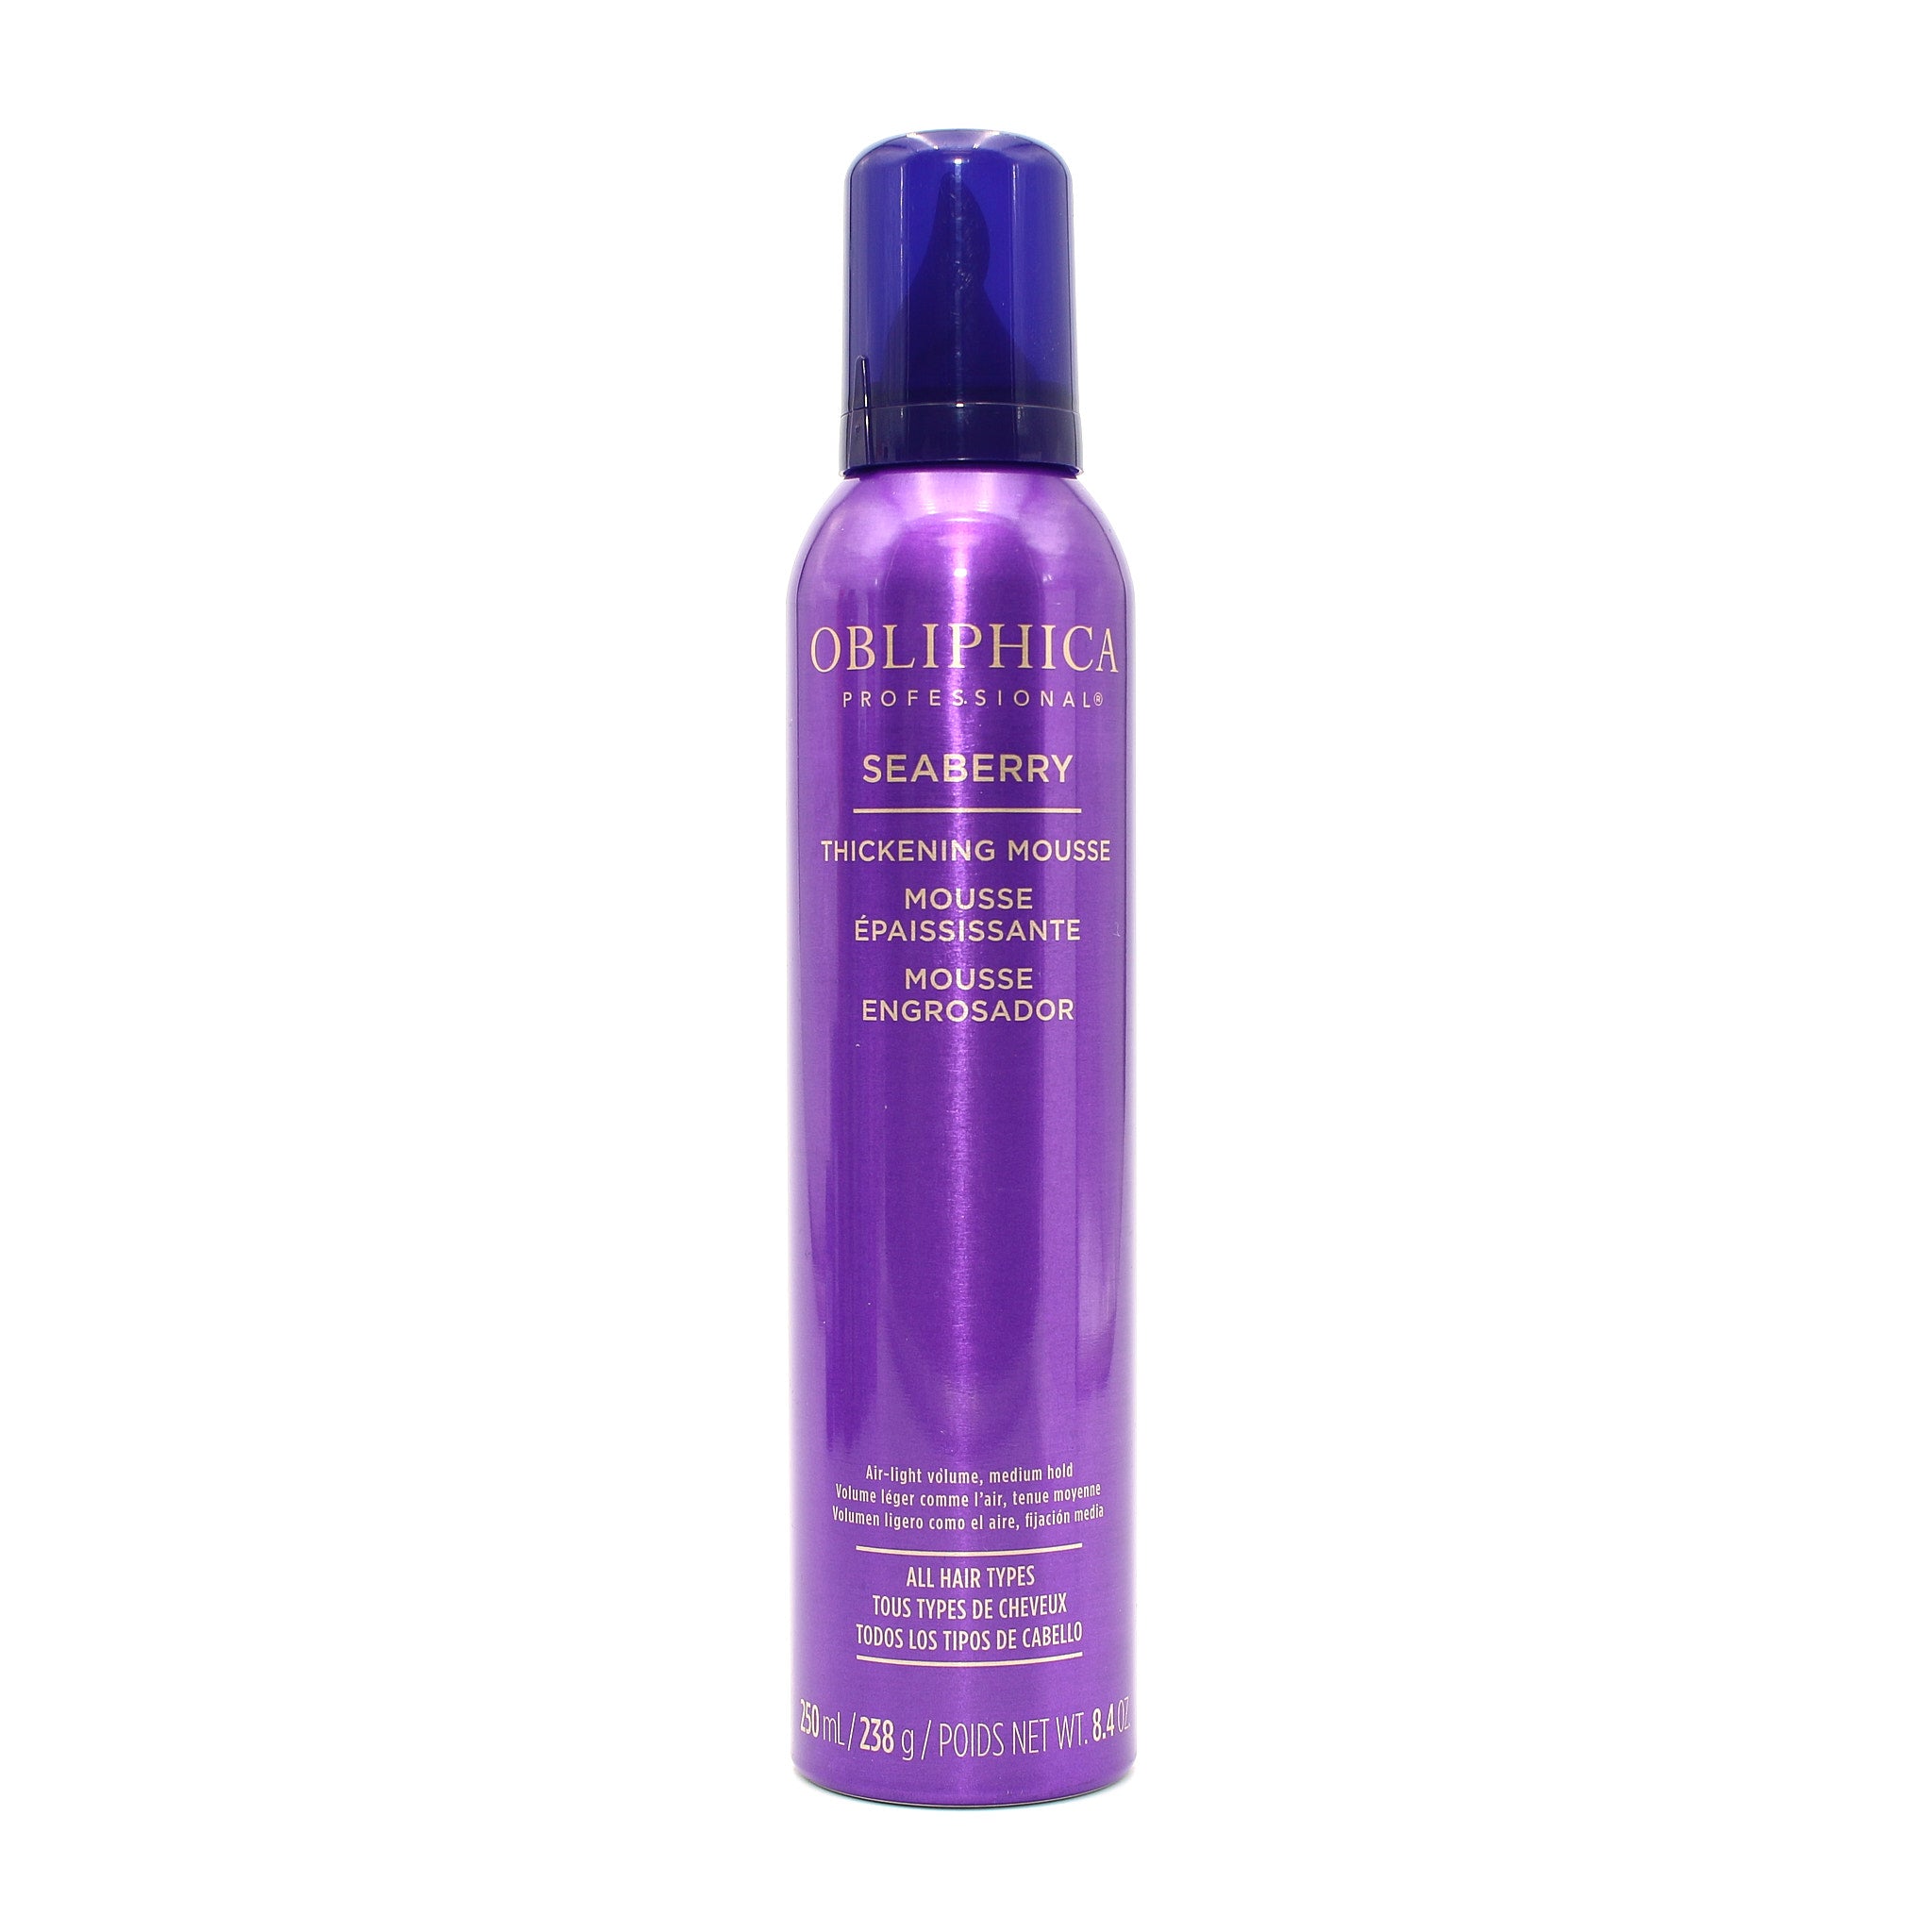 OBLIPHICA Sea Berry Thickening Mousse 8.4 oz